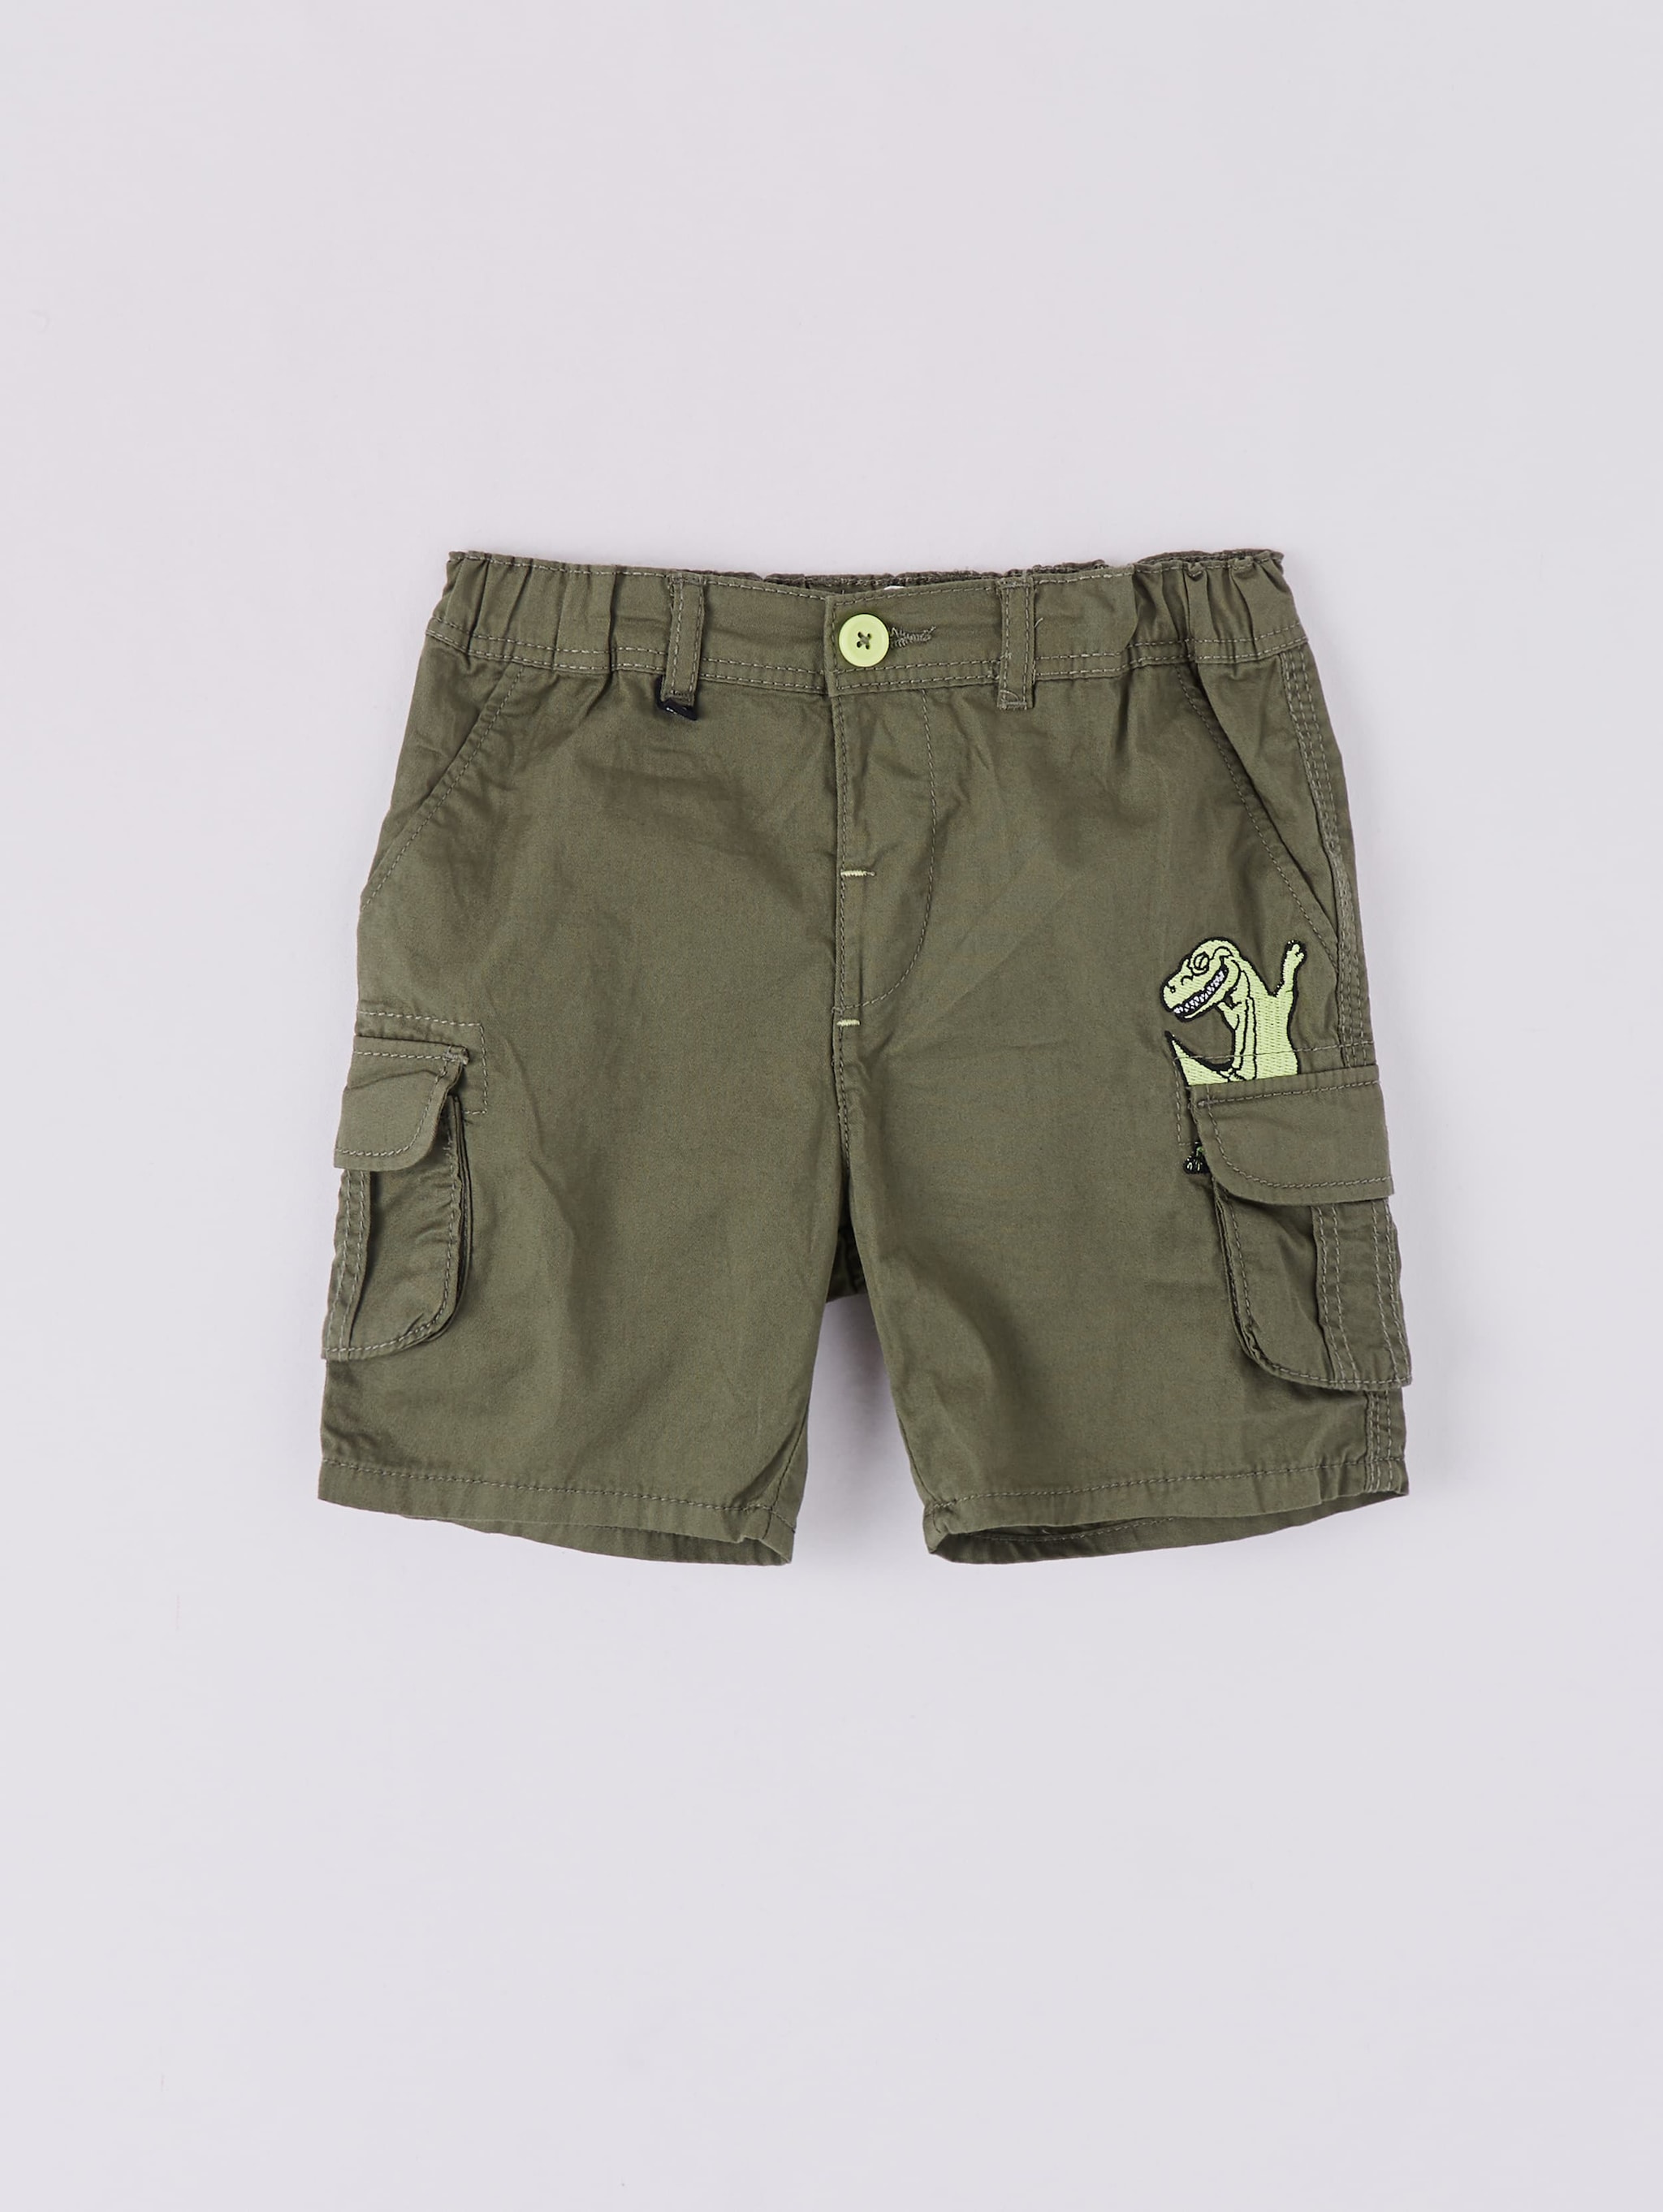 military cargo shorts online